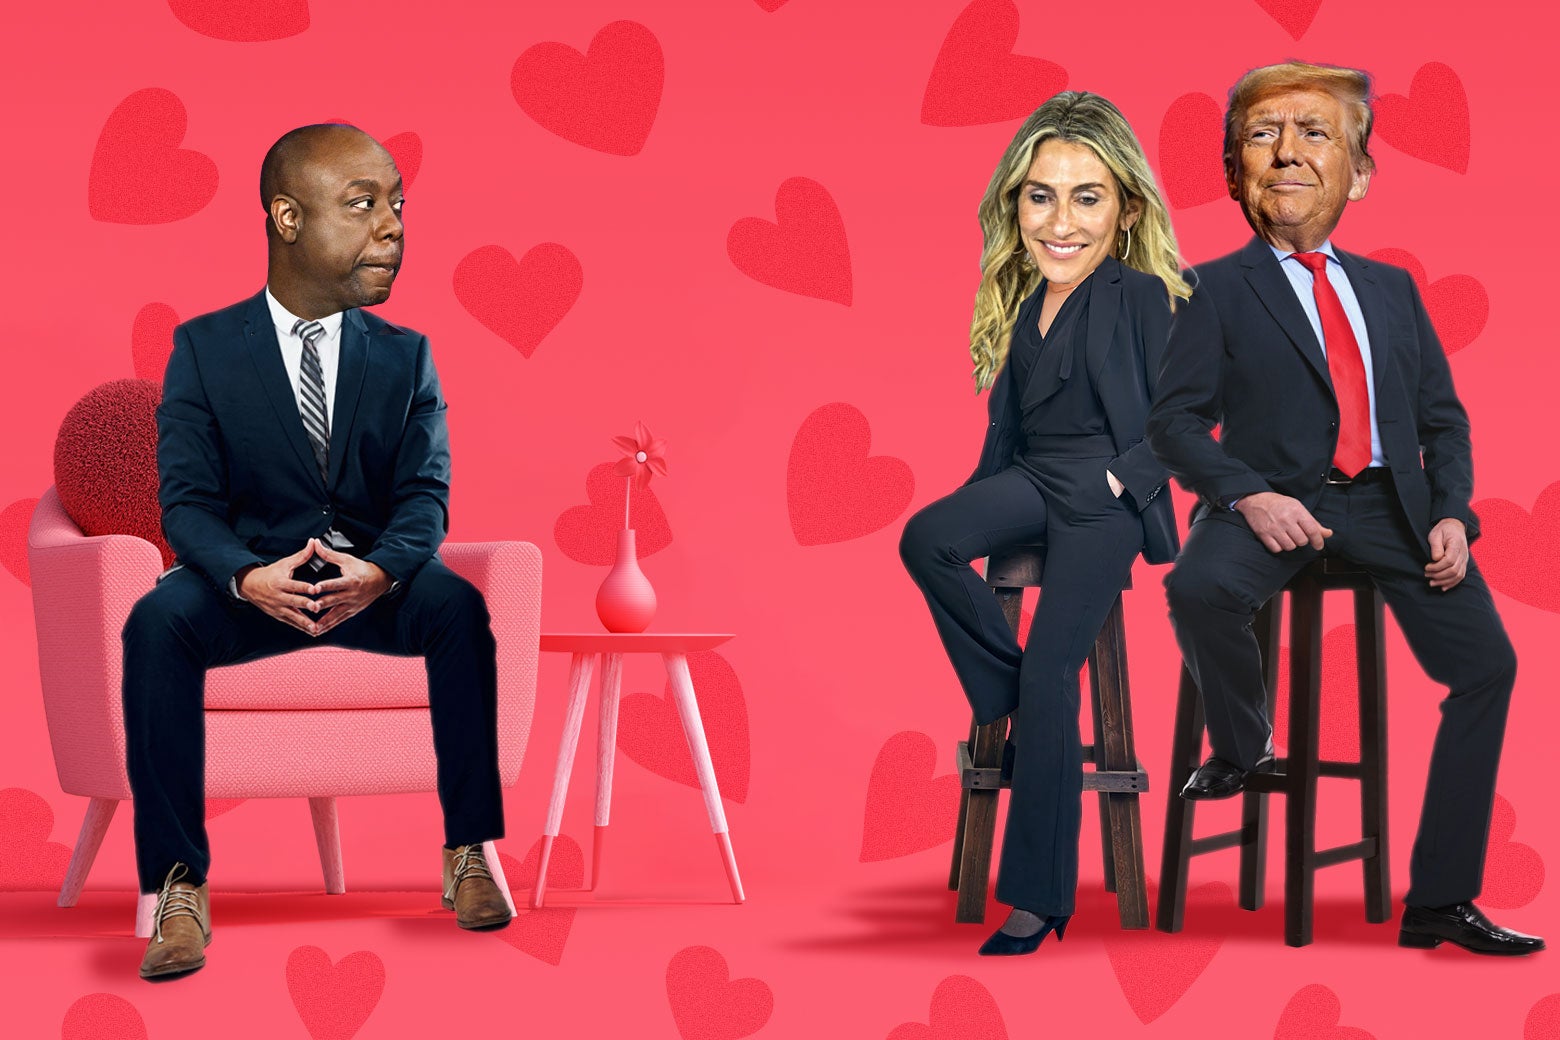 Tim Scott Gets Engaged, Makes a Romantic Gesture (Sort of) on Fox Nation Molly Olmstead